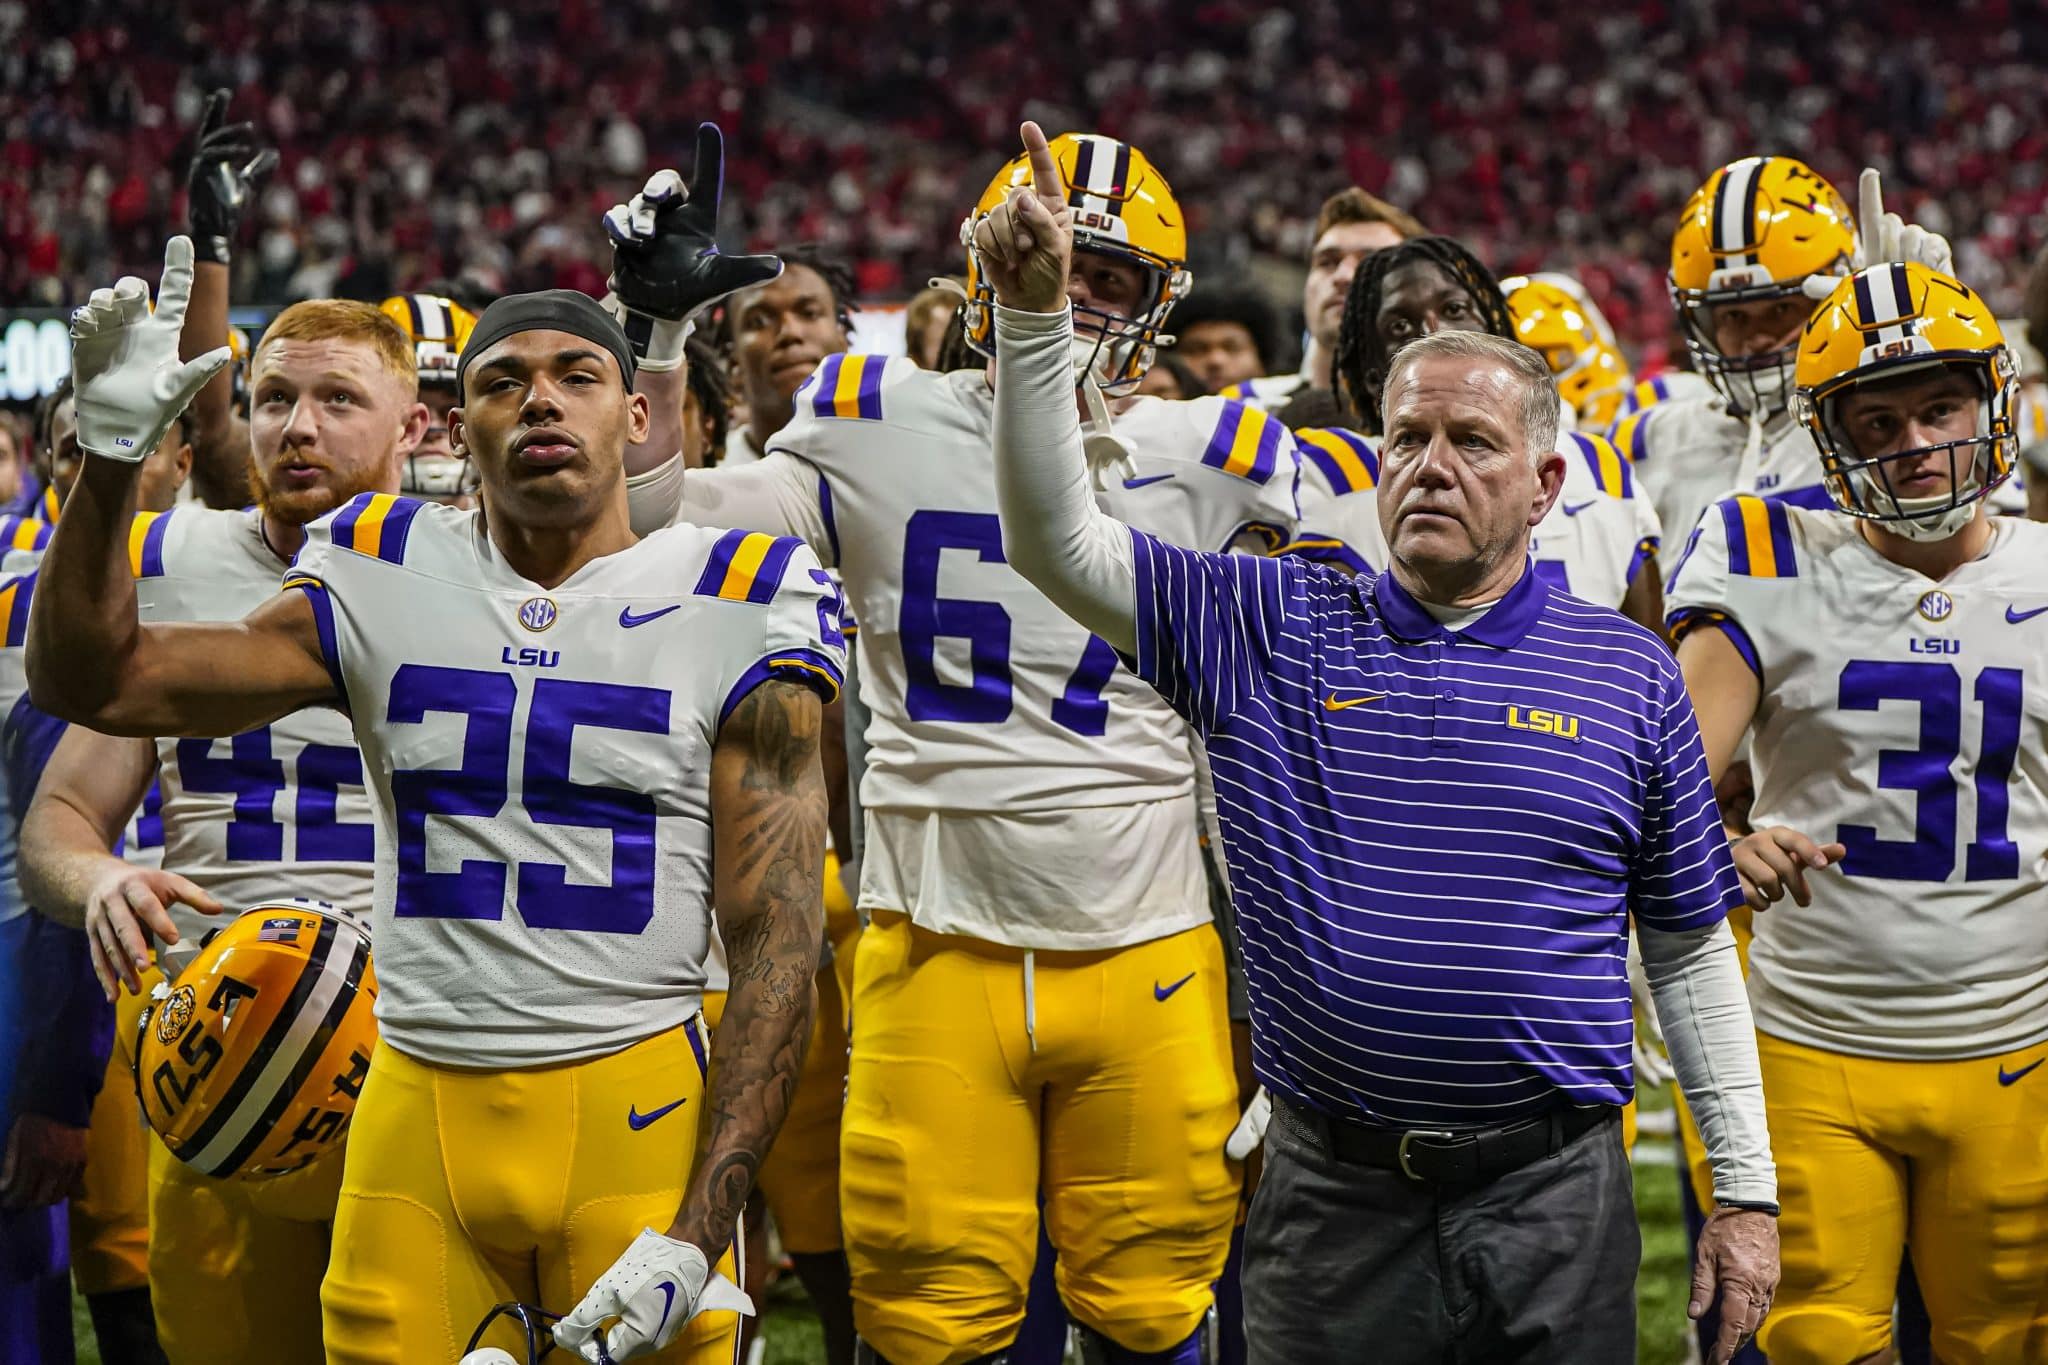 SDS sources: USC wanted out of its Week 1 showdown vs. LSU